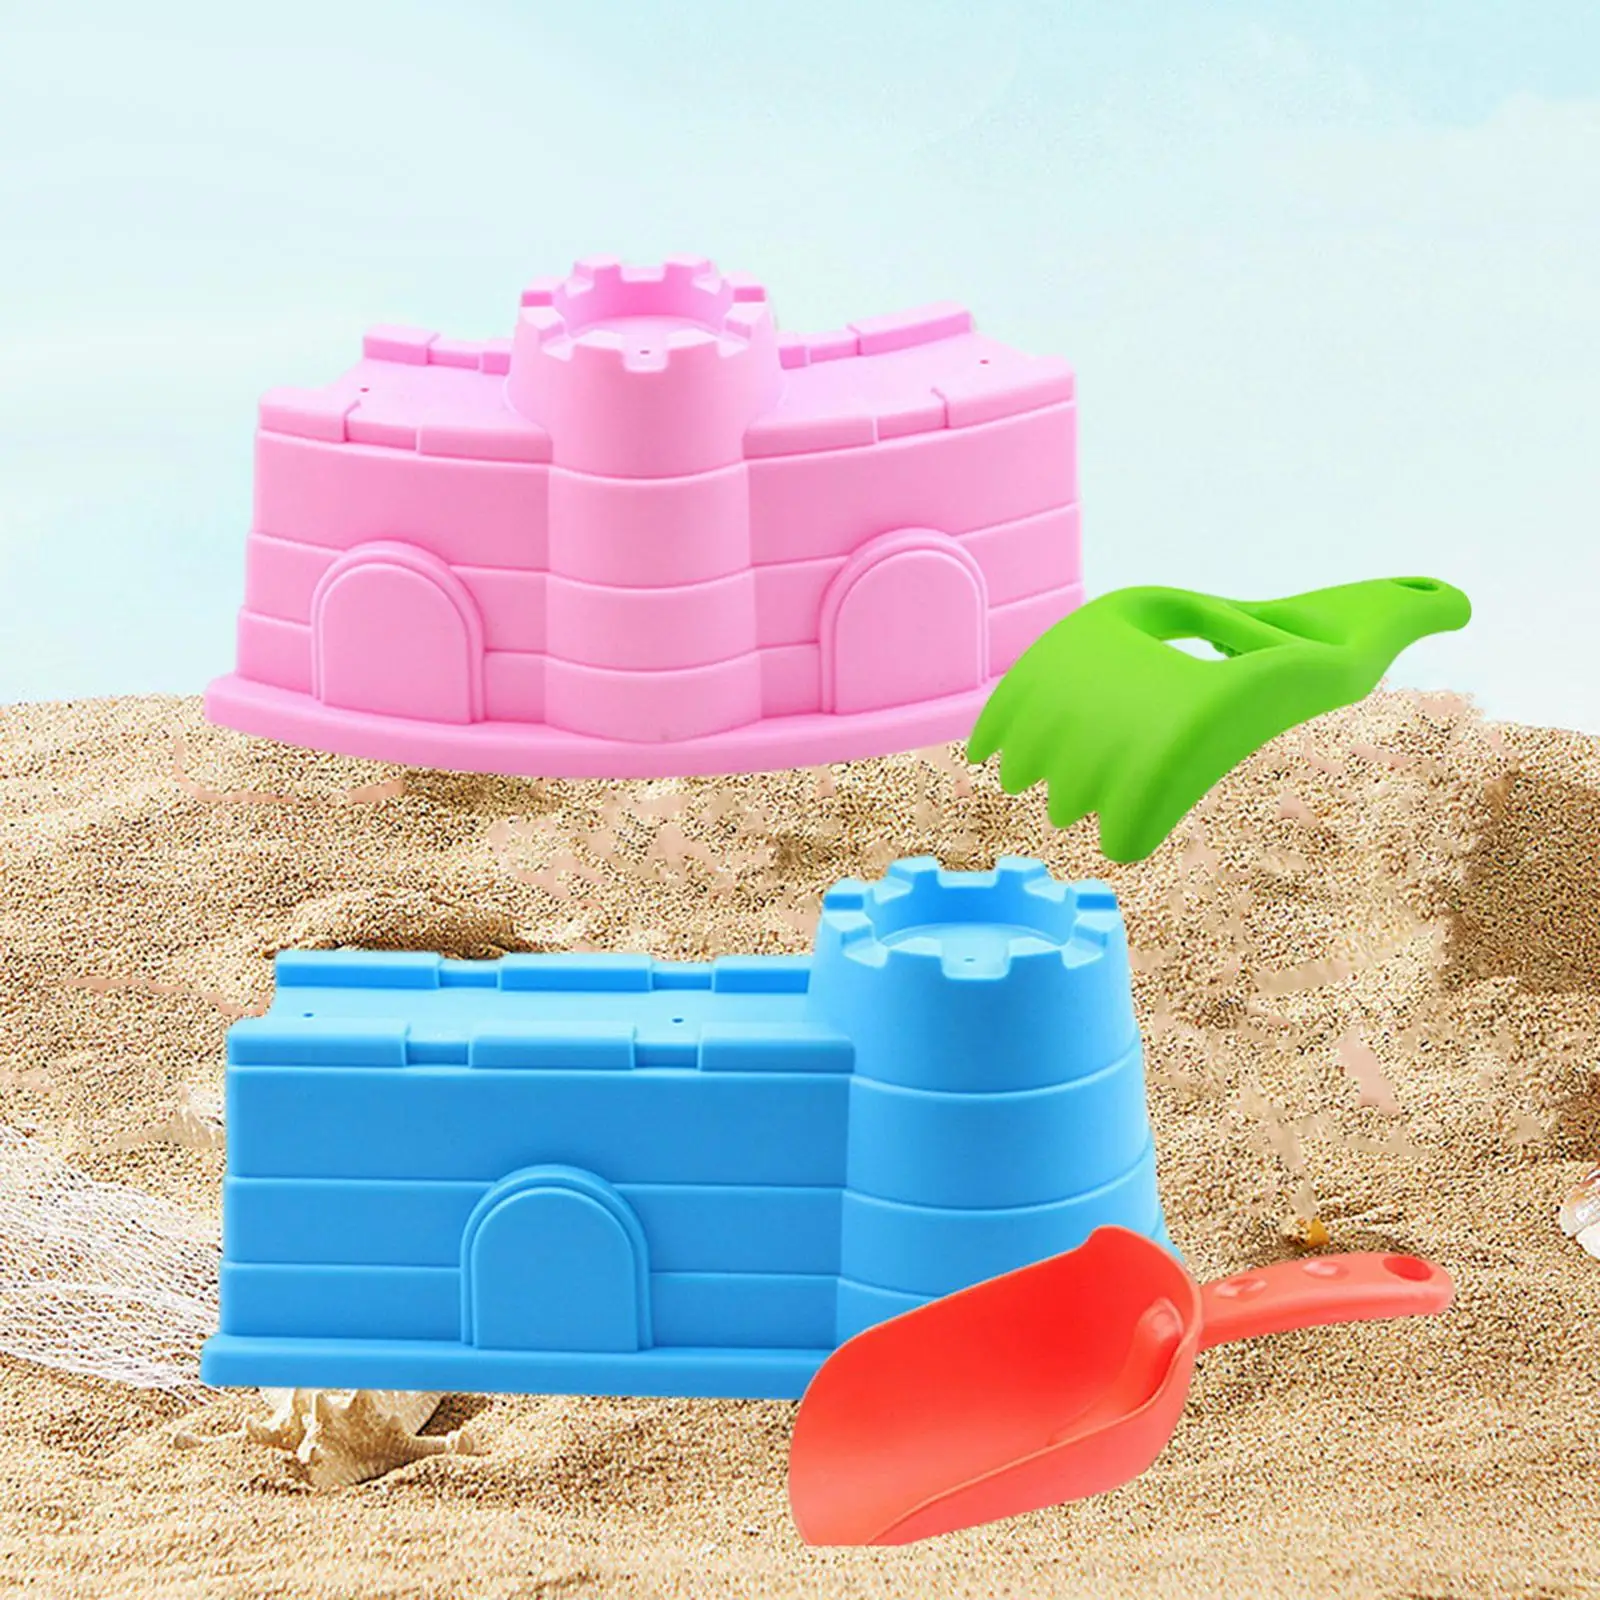 Castle Building for Kids Sandbox Play Sand Castle Toys for Beach Winter Snow Toys for Toddlers Boys Girls Outdoor Activities